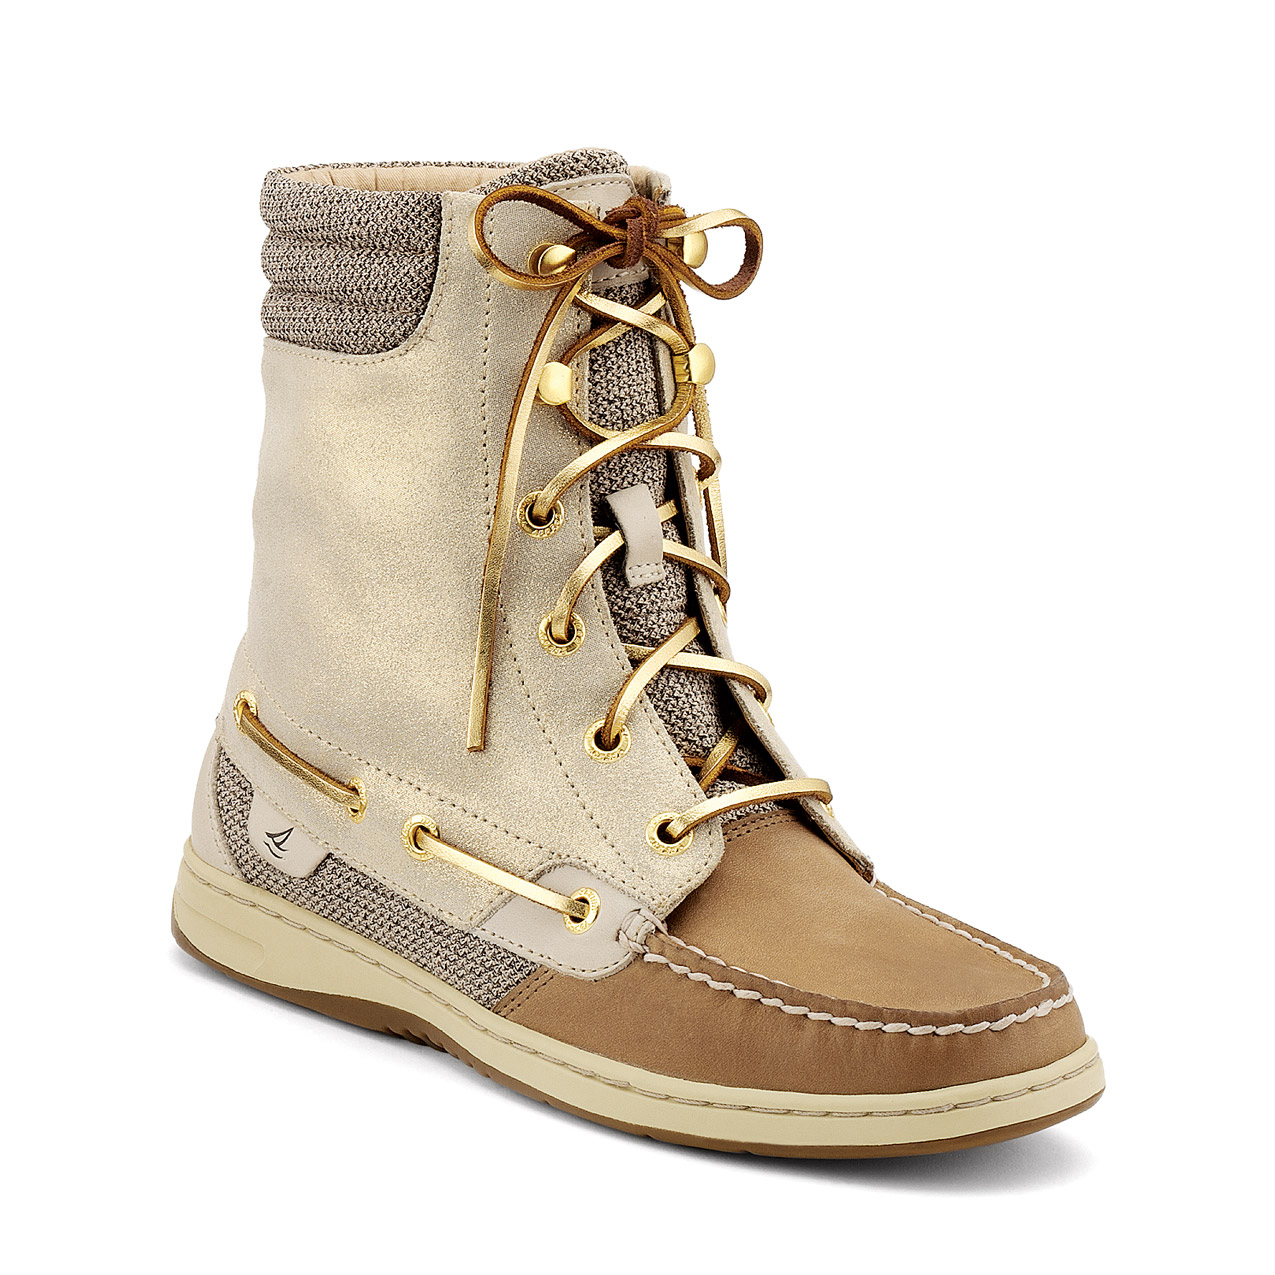 sperry top sider boots sperry top-sider womenu0027s hikerfish boot sparkle suede in linen/leather SJWMTZV